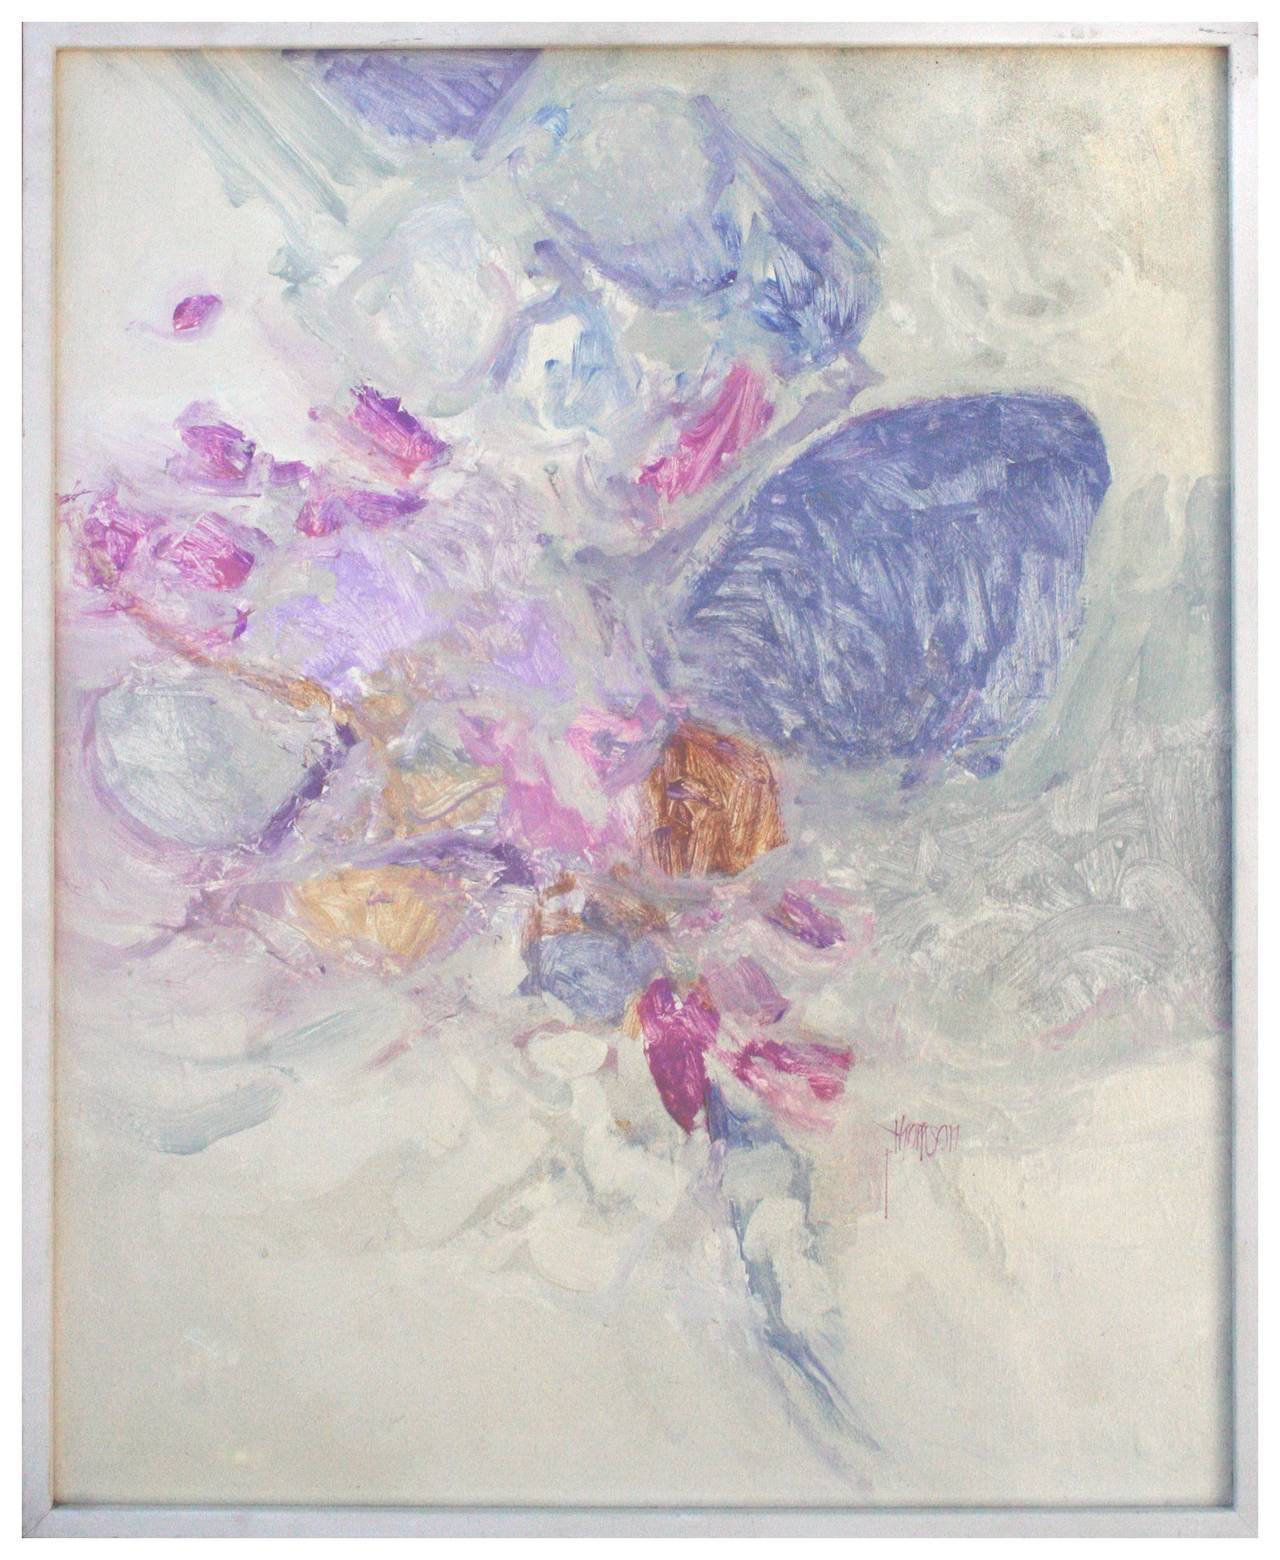 John Thomson Abstract Painting - Lavender Abstract Flowers